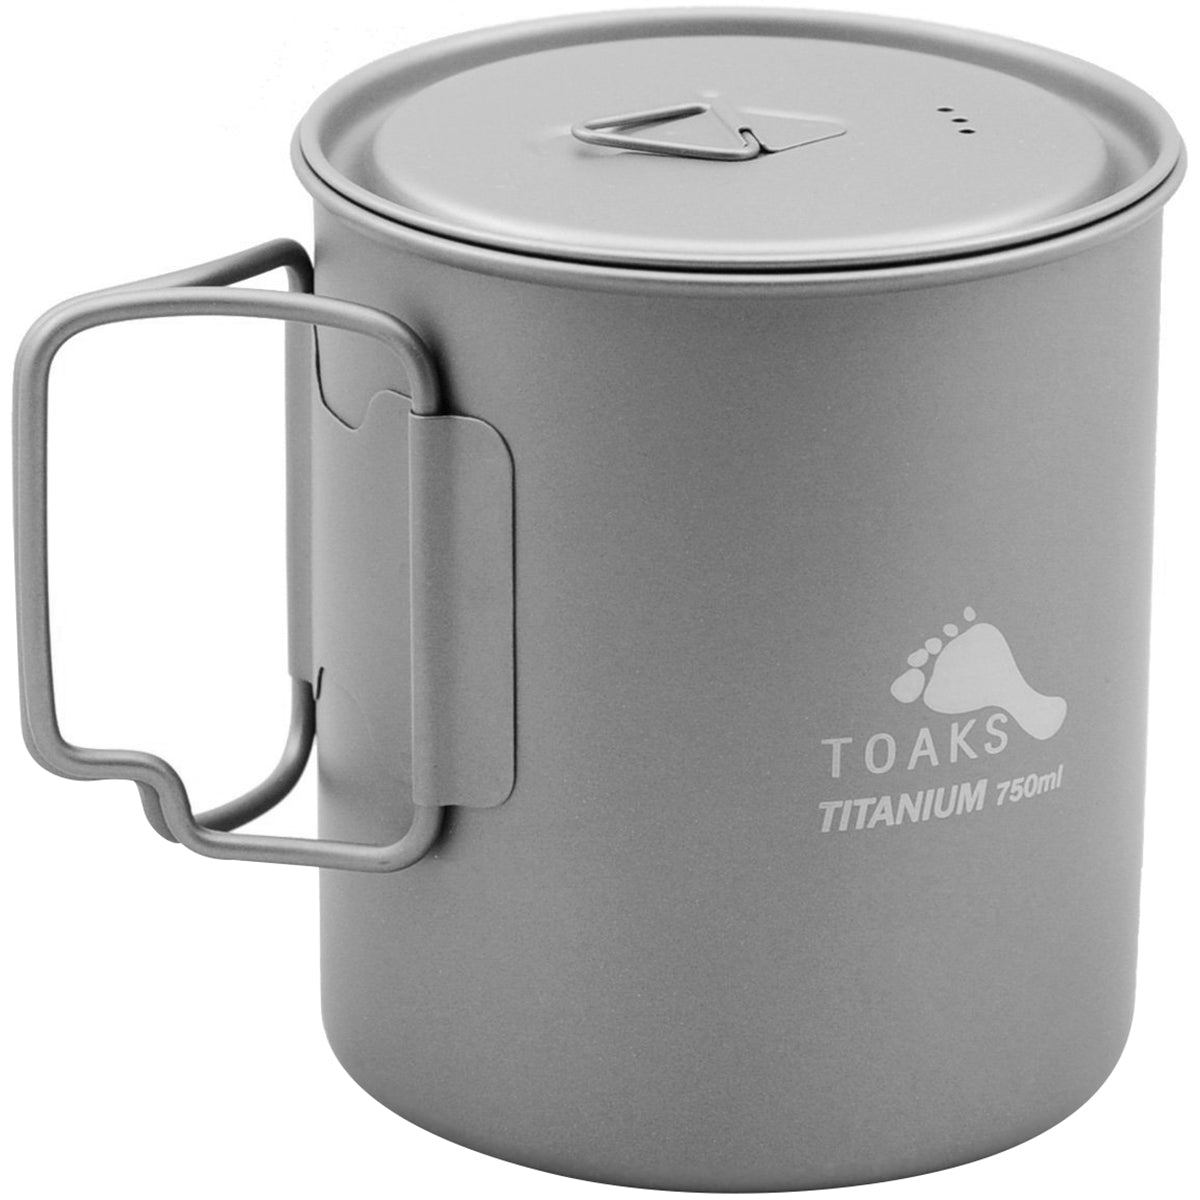 TOAKS Ultralight Titanium Camping Cook Pot with Foldable Handles and Lid - 750ml TOAKS